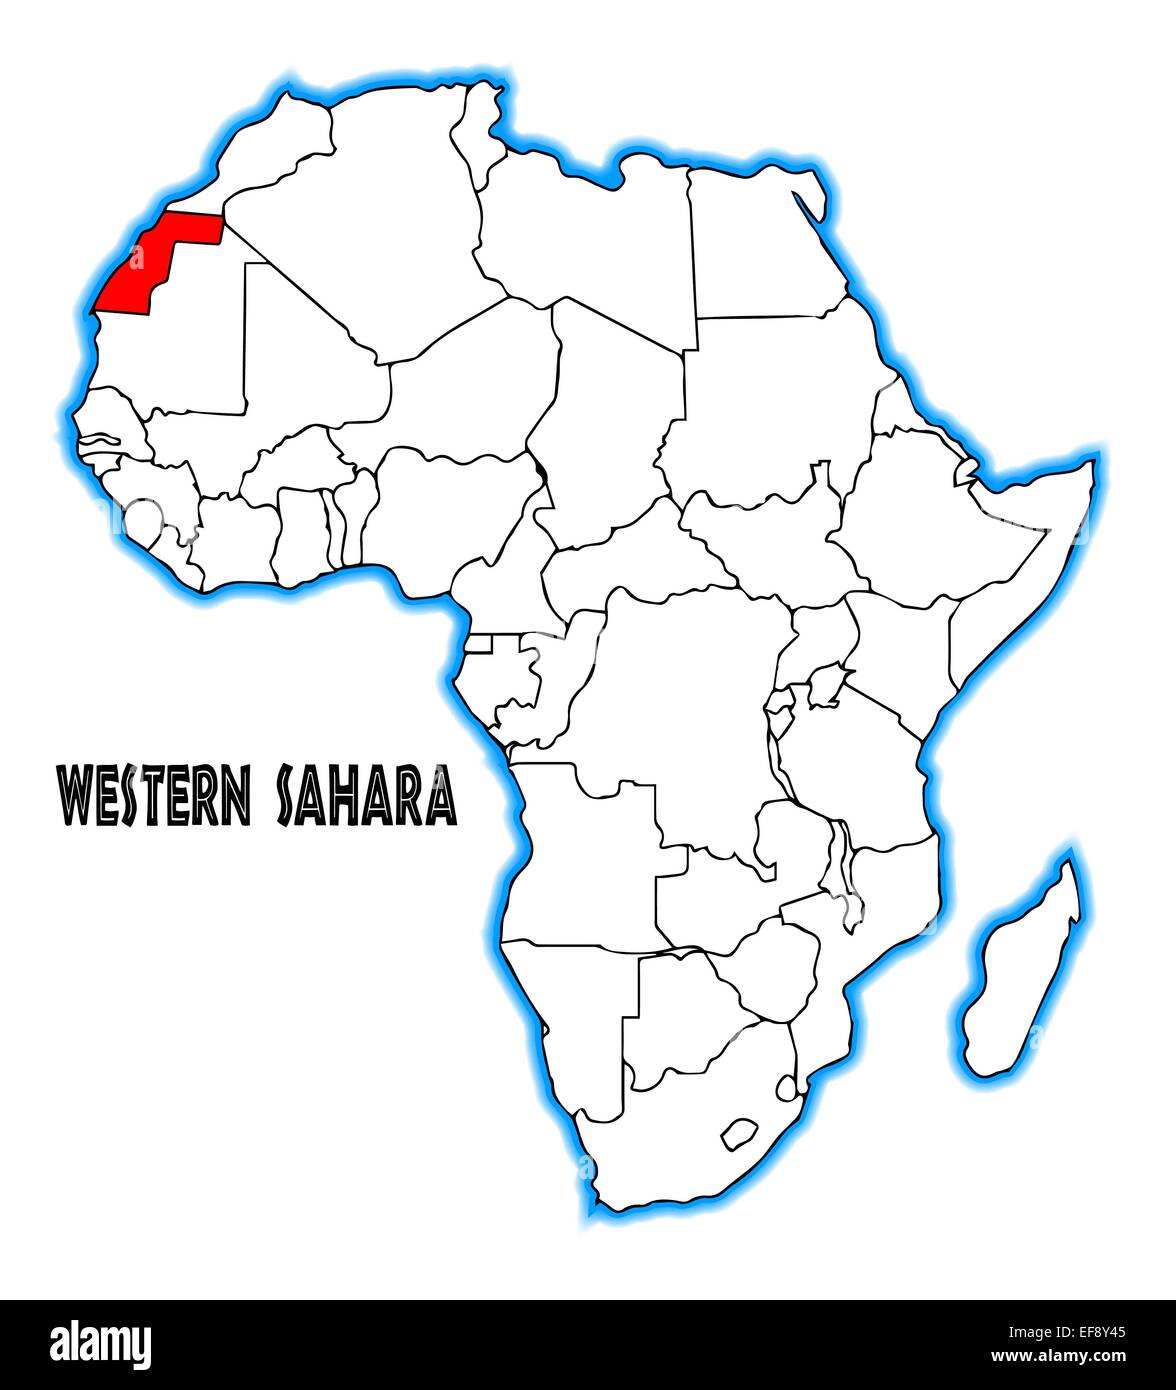 Western Sahara outline inset into a map of Africa over a white background Stock Photo